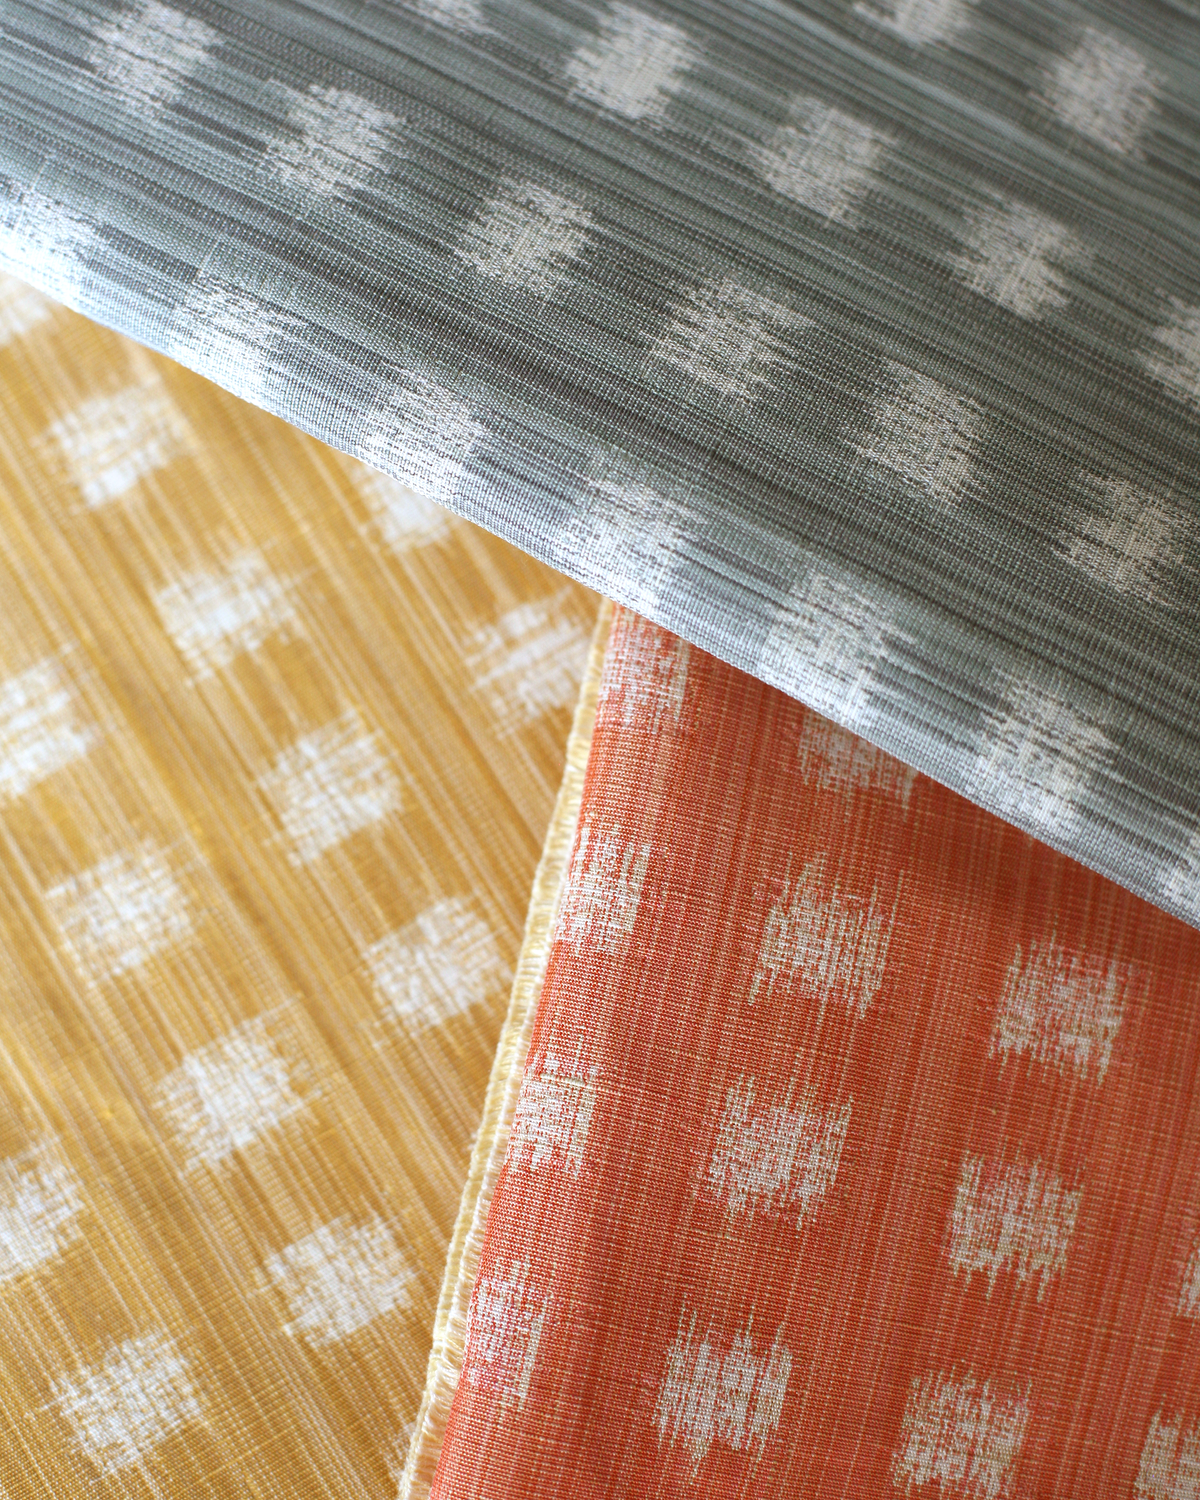 Gridded Ikat Fabric in Coral